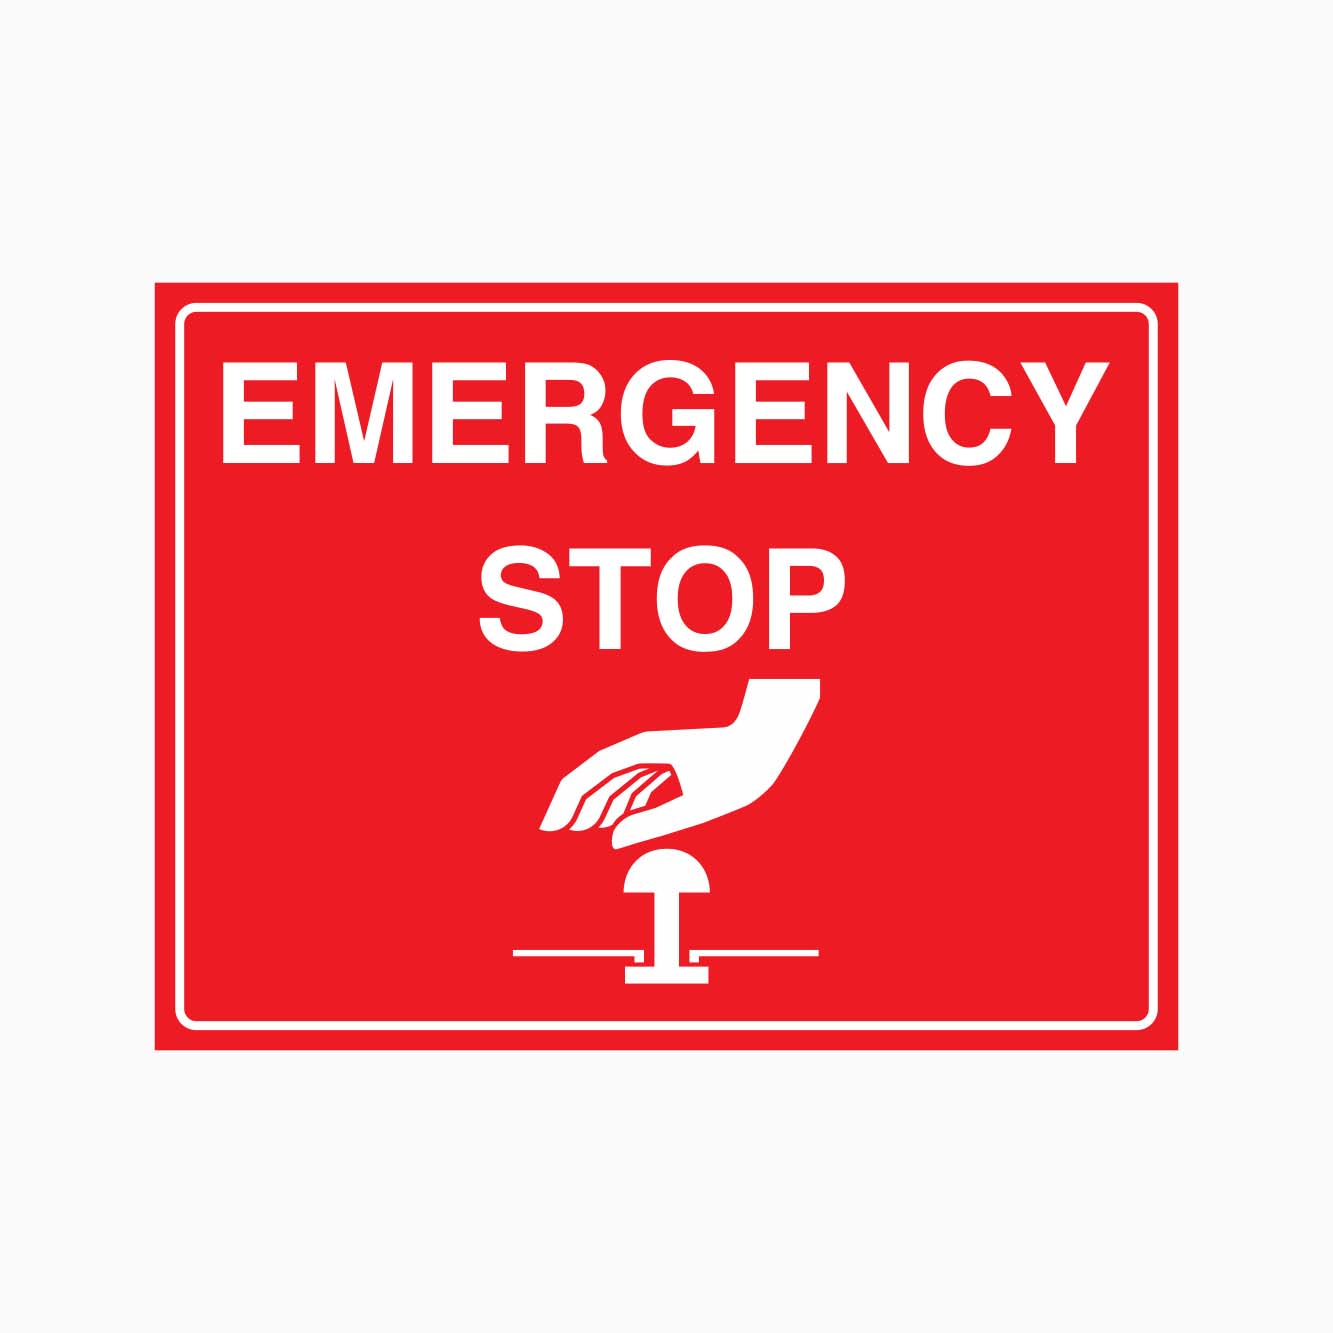 EMERGENCY STOP SIGN - GET SIGNS